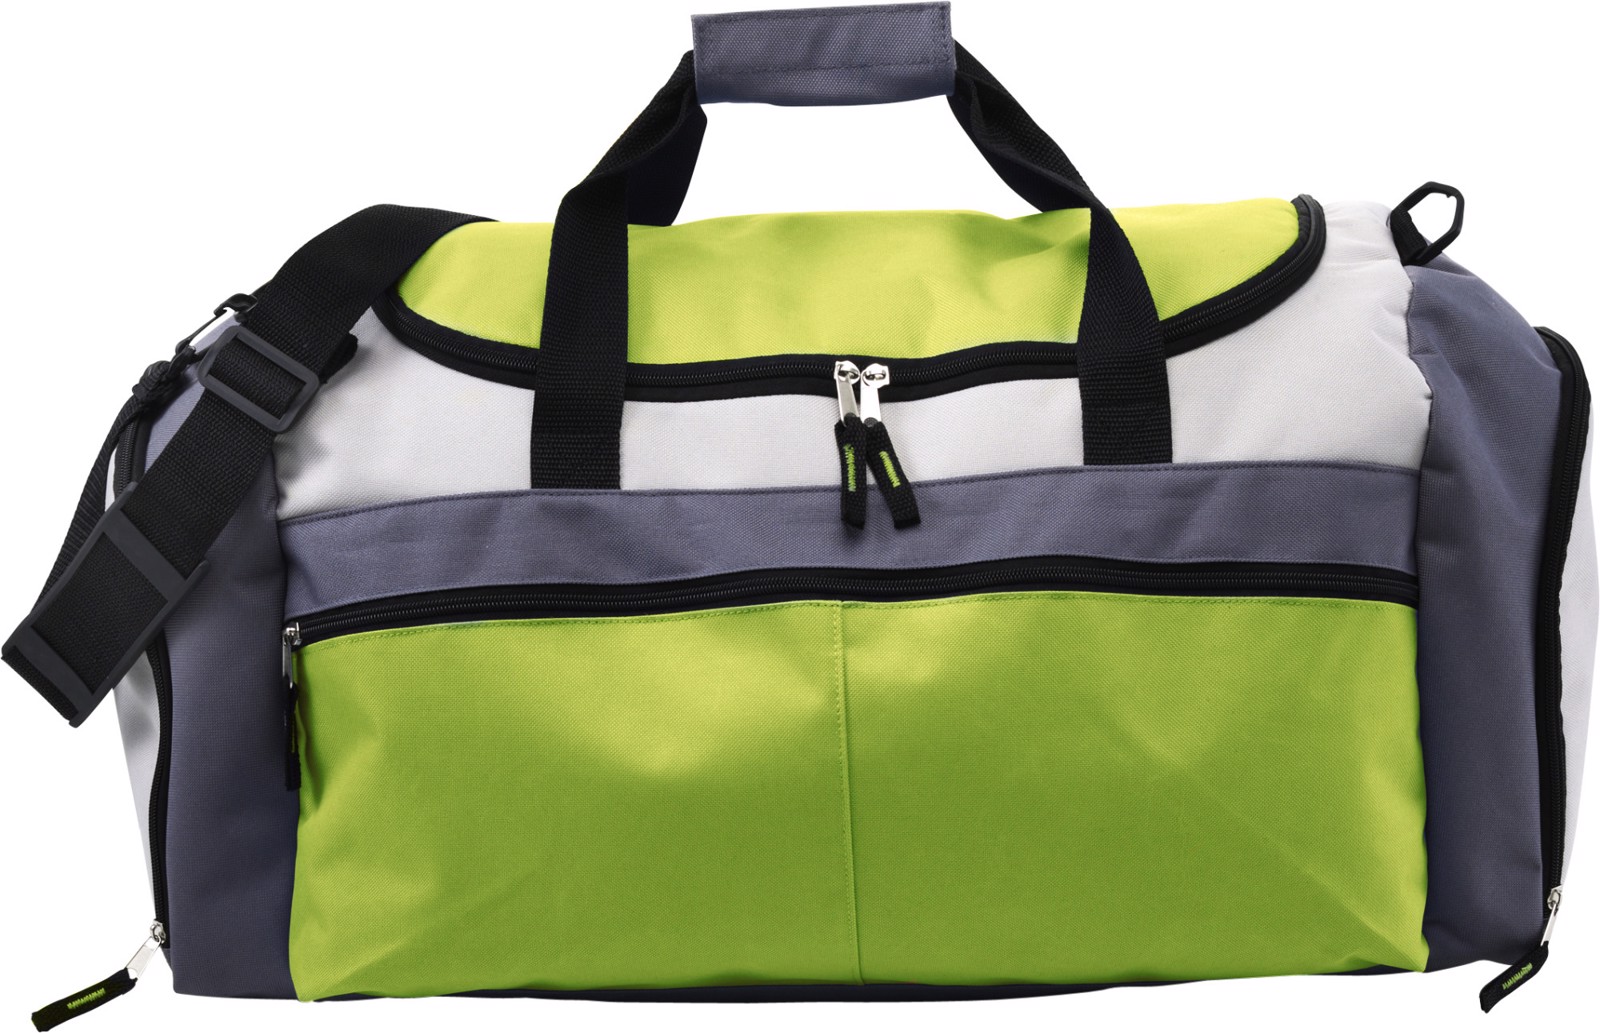 Polyester (600D) sports bag - Lime